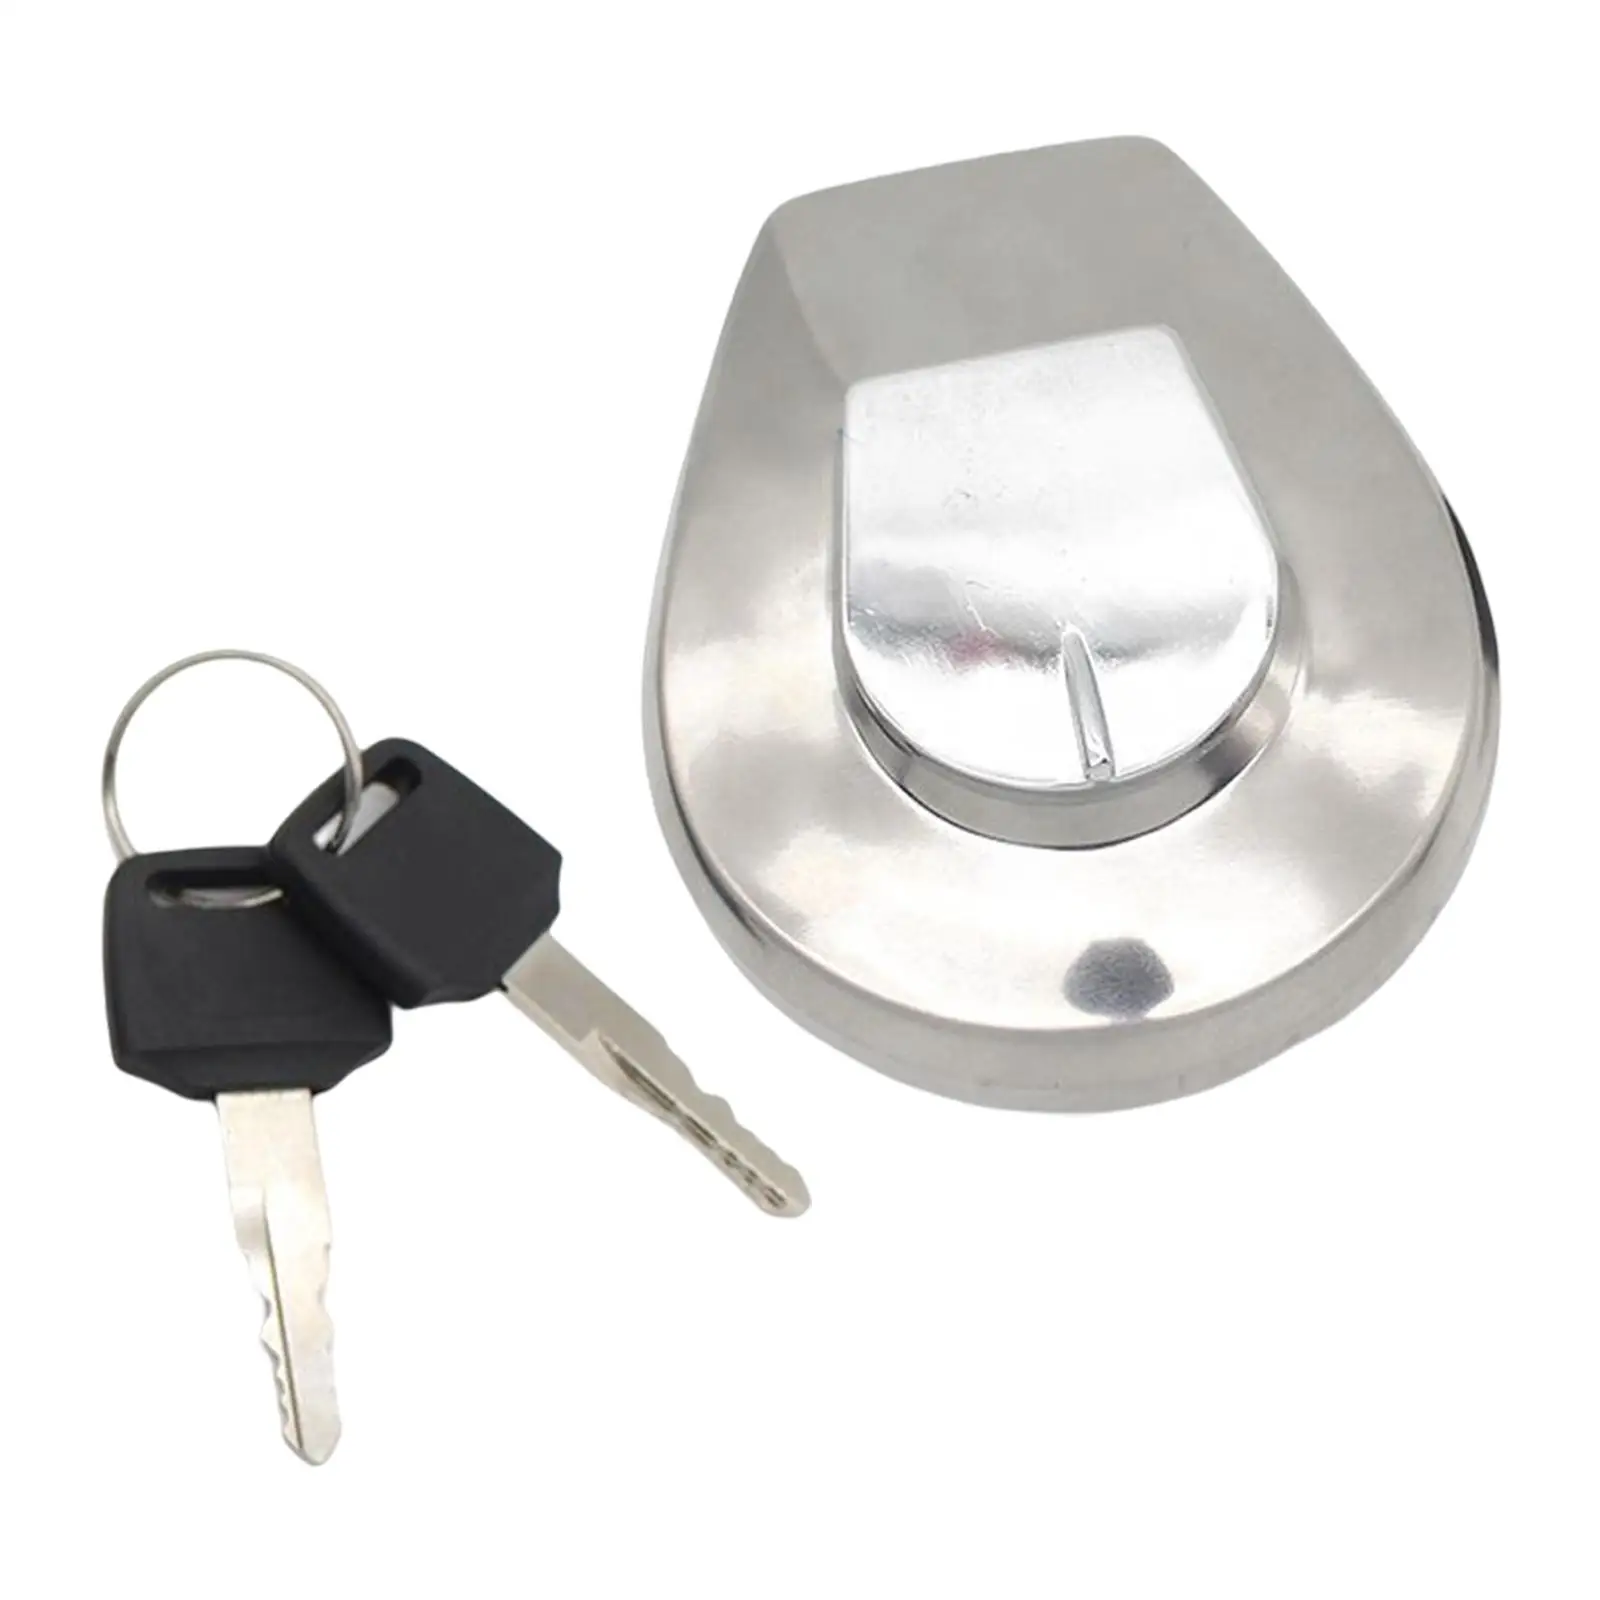 Motorbike Oil Fuel Tank Gas Cap Cover with 2 Keys for  Vf750C GL1500CD CX650C Vf1100C CB750